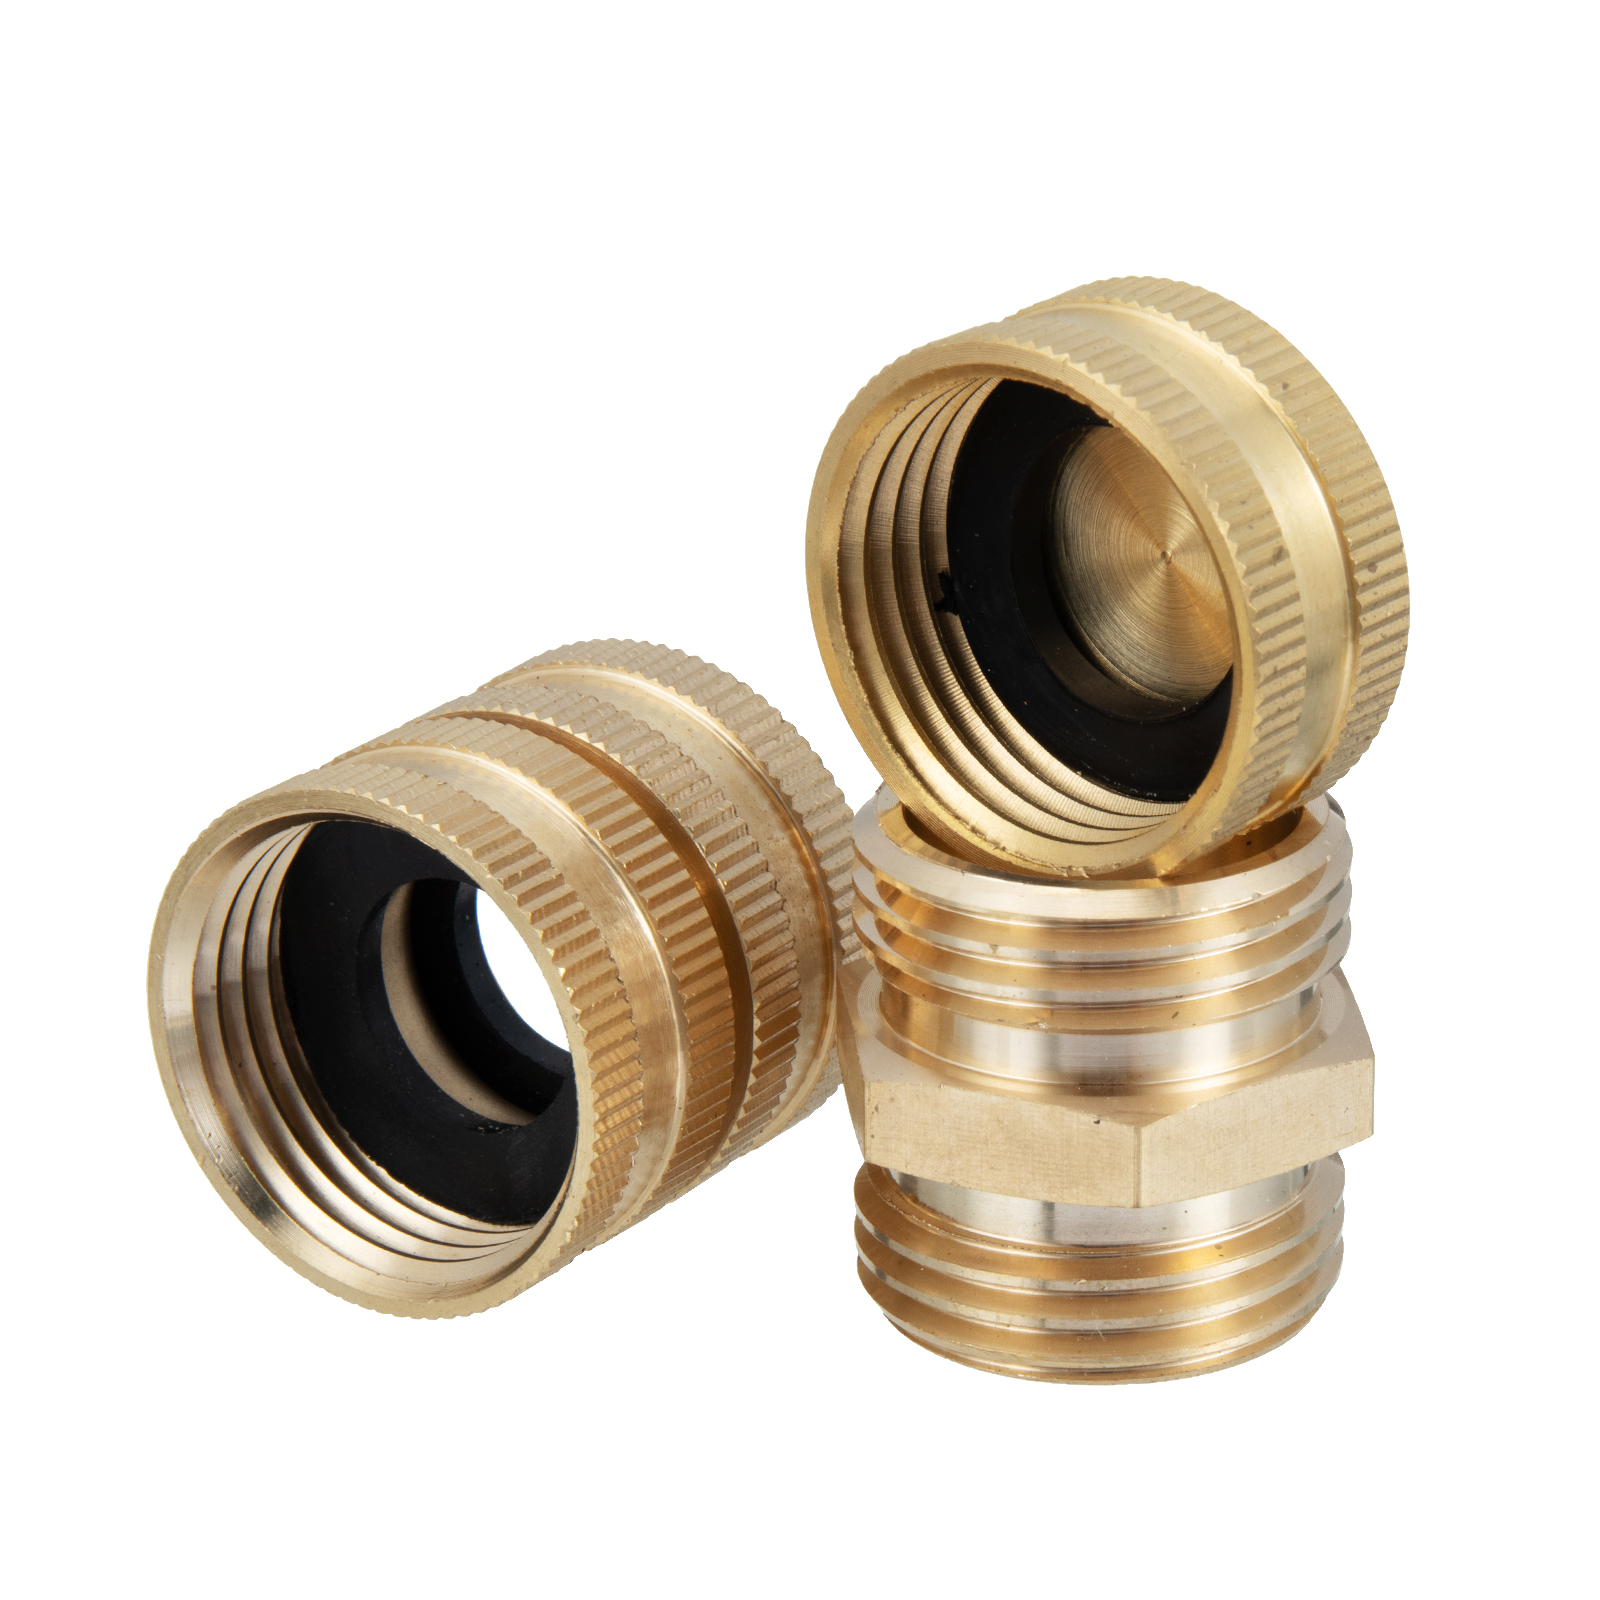 MATCC Garden Hose Adapter Hose End Caps 3/4 Inch GHT Brass Hose Connector Male to Male Female to Female Fittings 2 Kits 4 Pack Garden Hose Caps